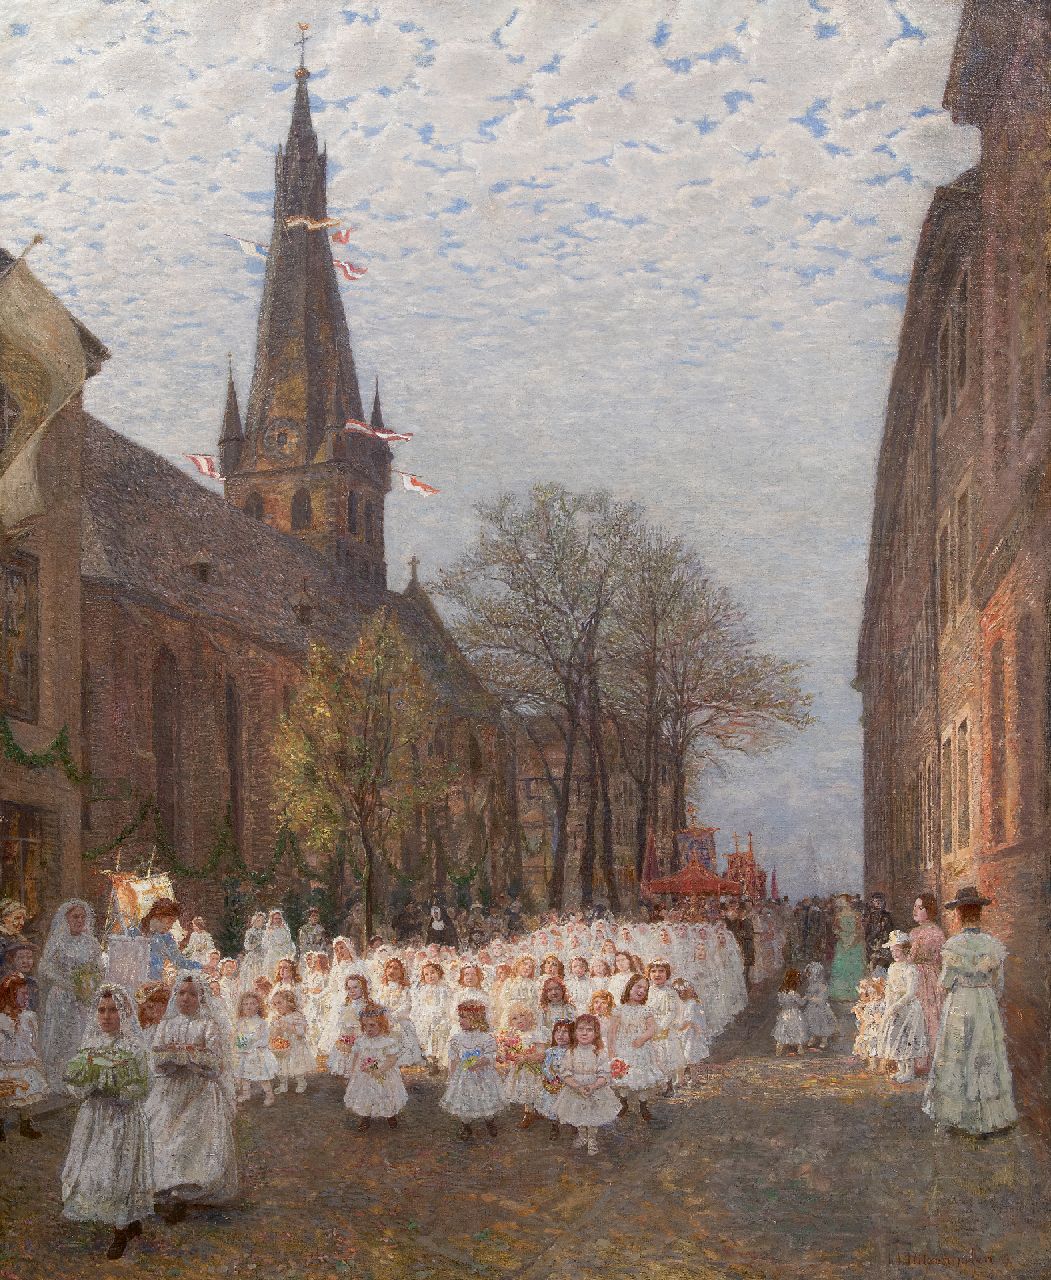 Ritzenhofen H.  | Hubert Ritzenhofen | Paintings offered for sale | Procession of the first communicants alongside church of St. Lambertus in Düsseldorf, oil on canvas 116.9 x 96.0 cm, signed l.r. and dated '09, without frame